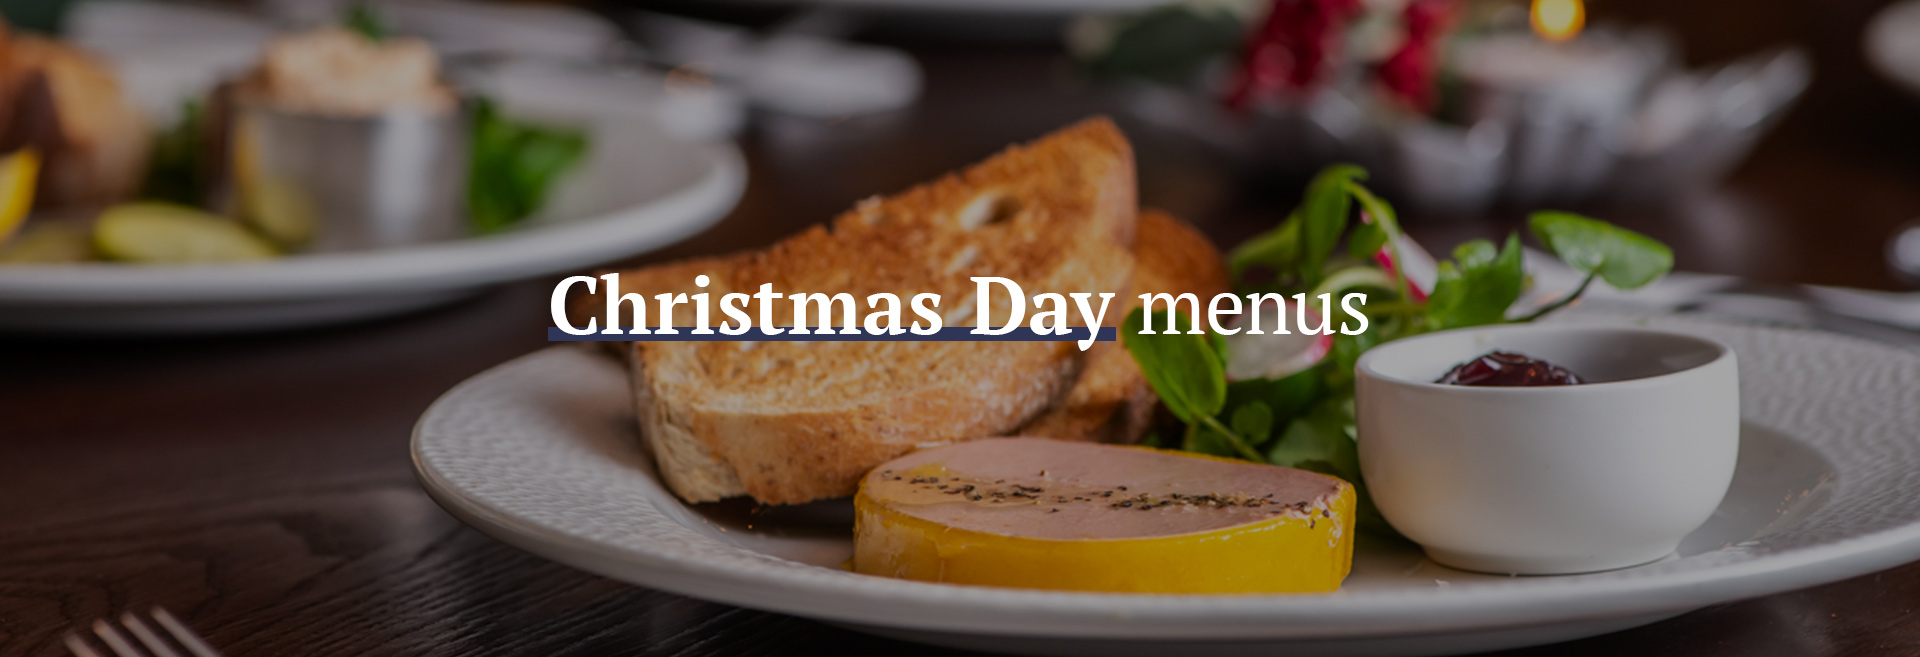 Christmas Day Menu at Harry Cook Free House